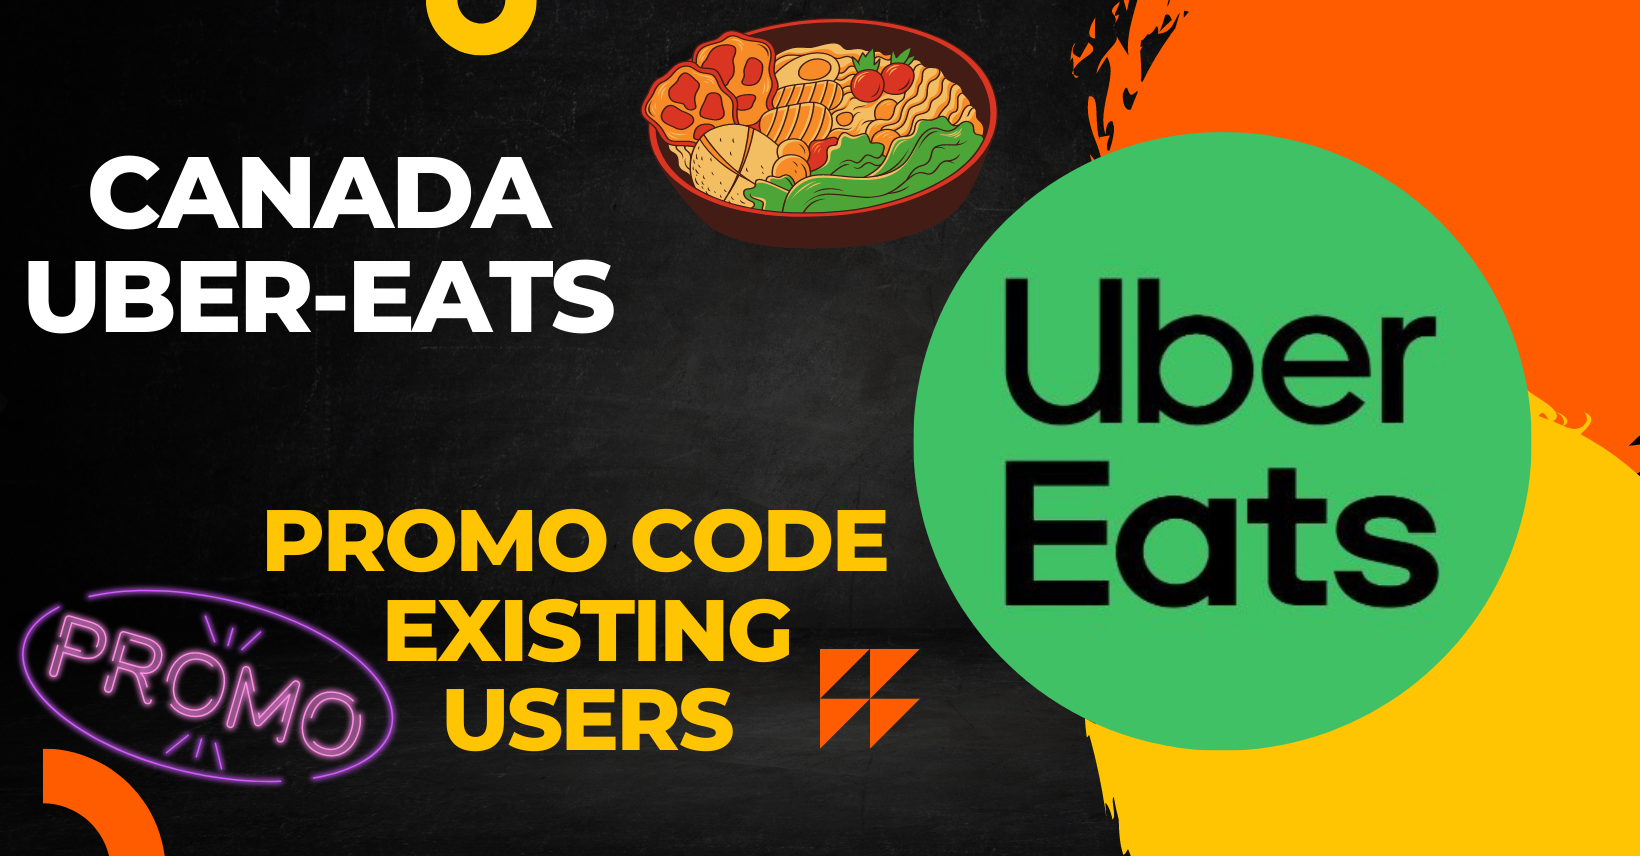 ubereats-promo-code-canada-existing-users-2023-new-user